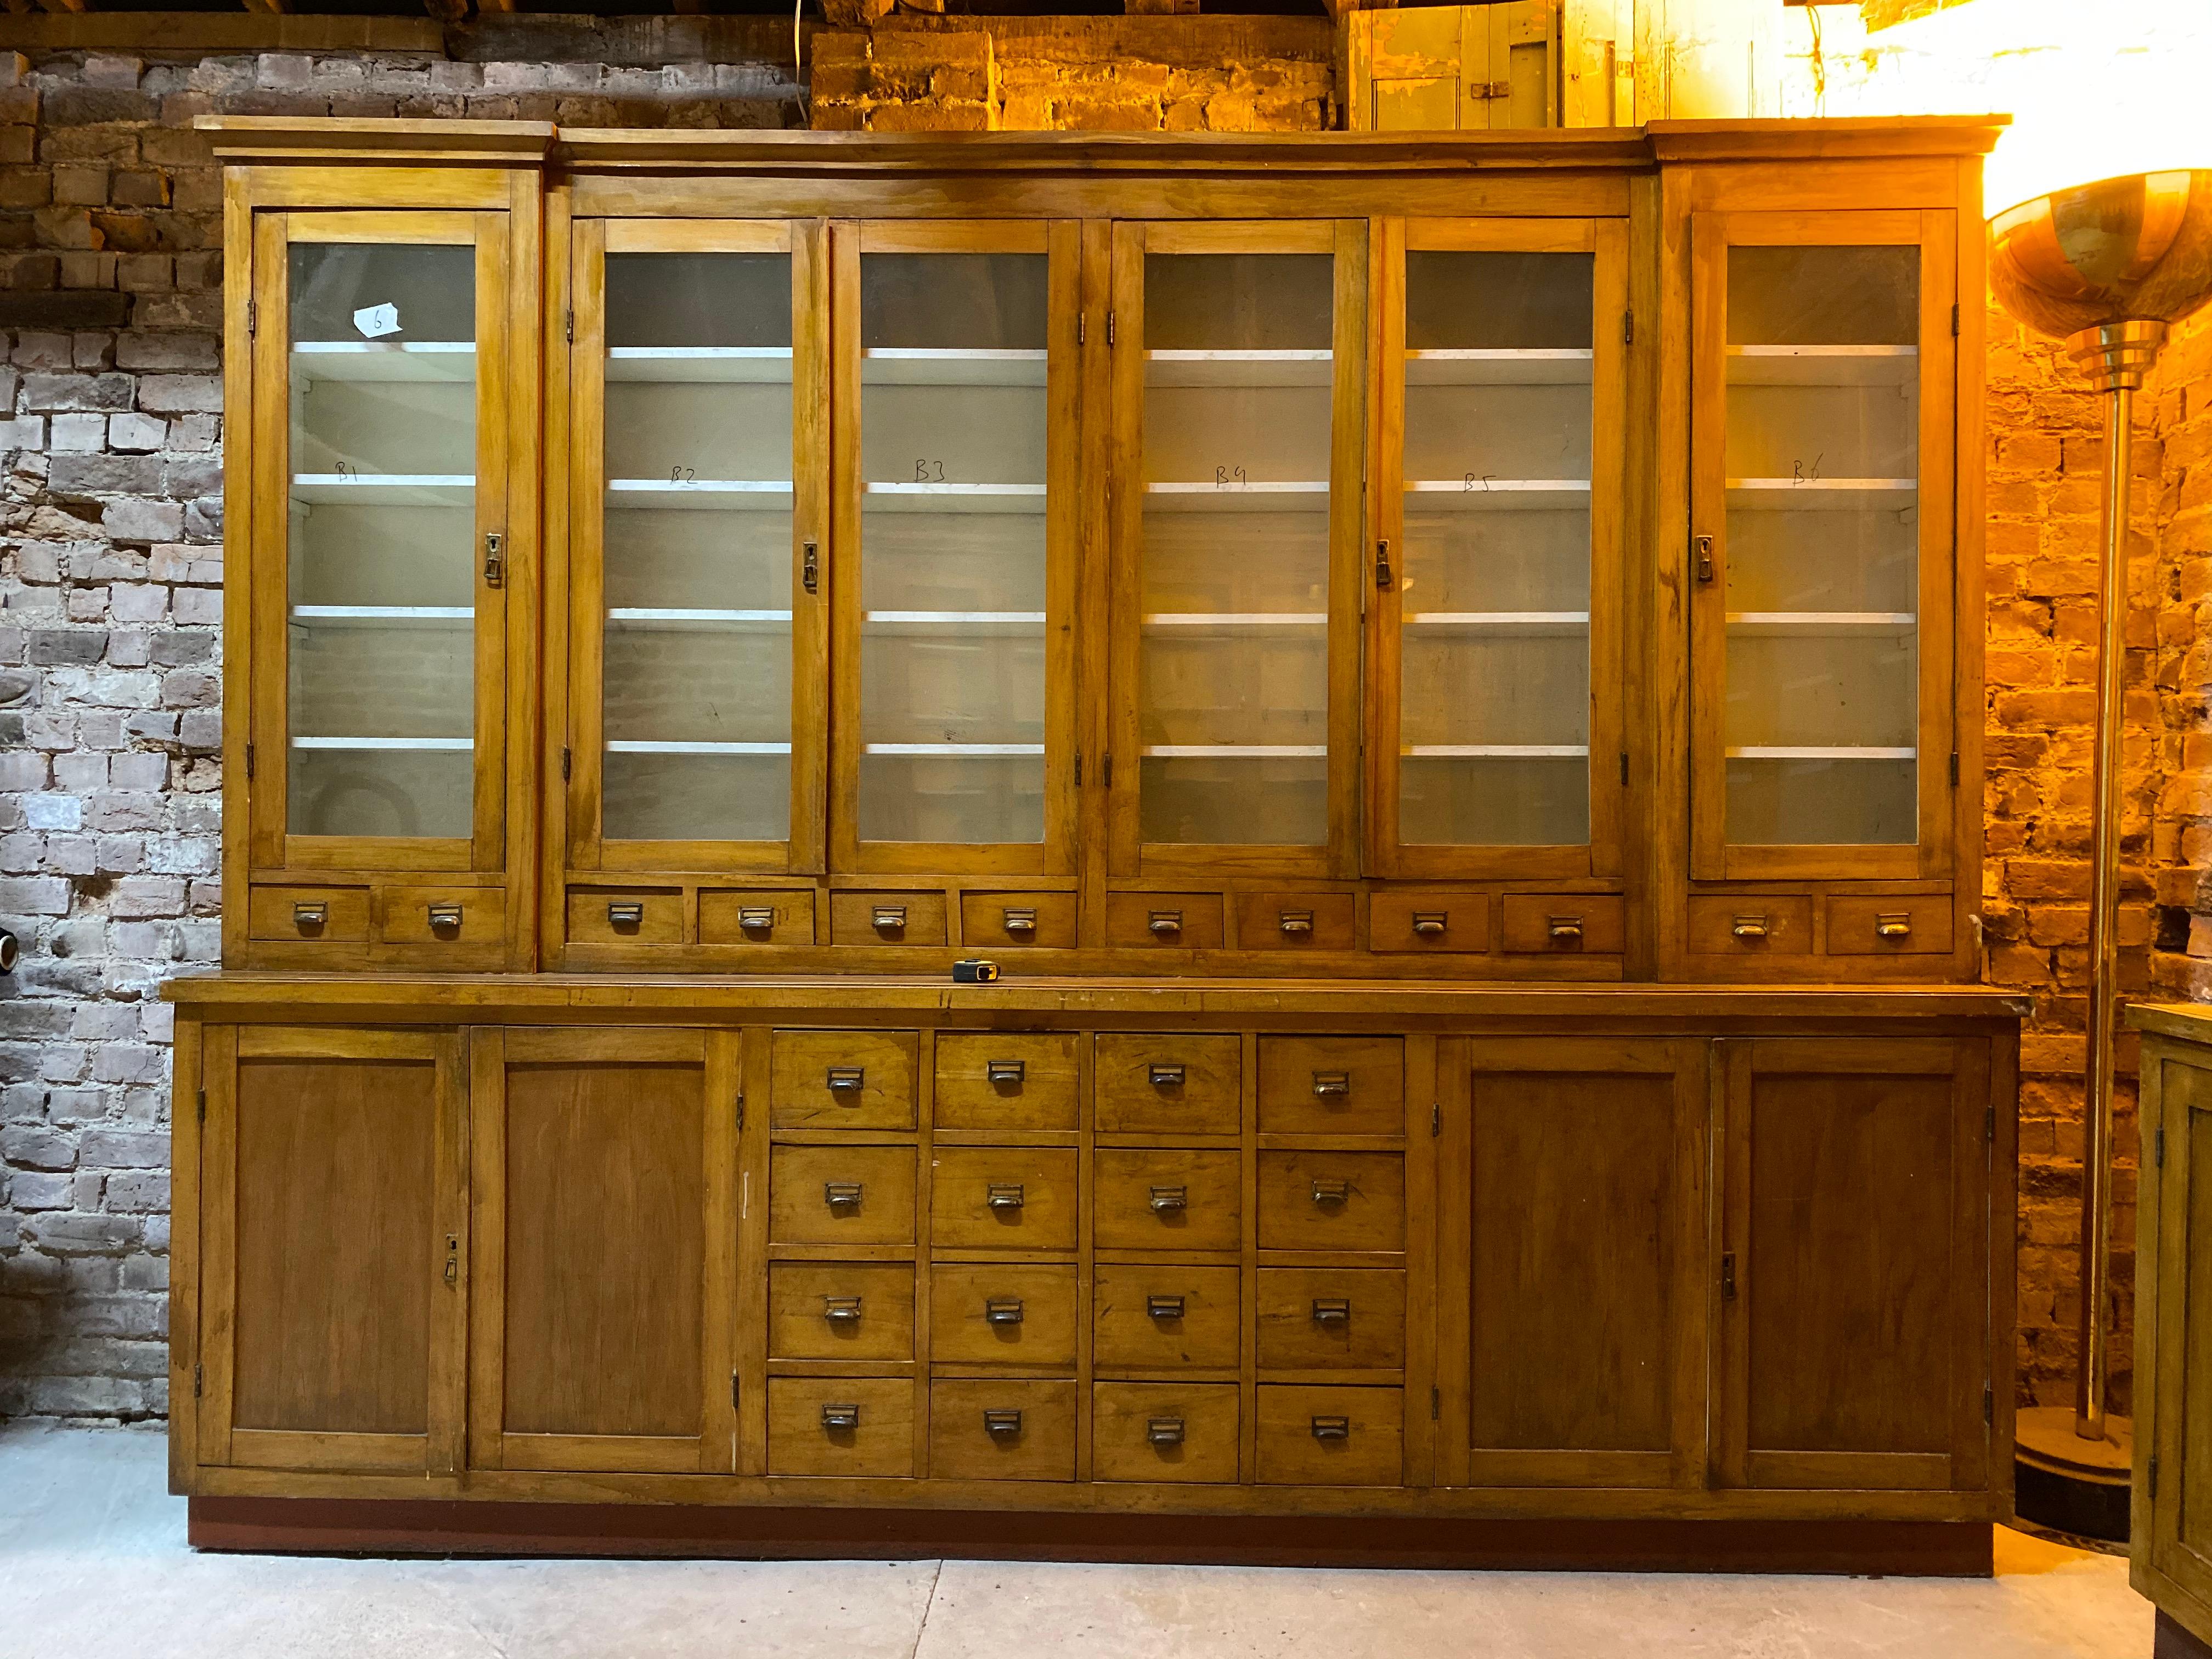 Large Apothecary Display Cabinet Pharmacy Chemist Shop Circa 1920s Number 3

Magnificent breakfront Apothecary Pharmacy beech display cabinet dating to circa 1920s, This piece is one of six similar pieces all from the same pharmacy, the upper